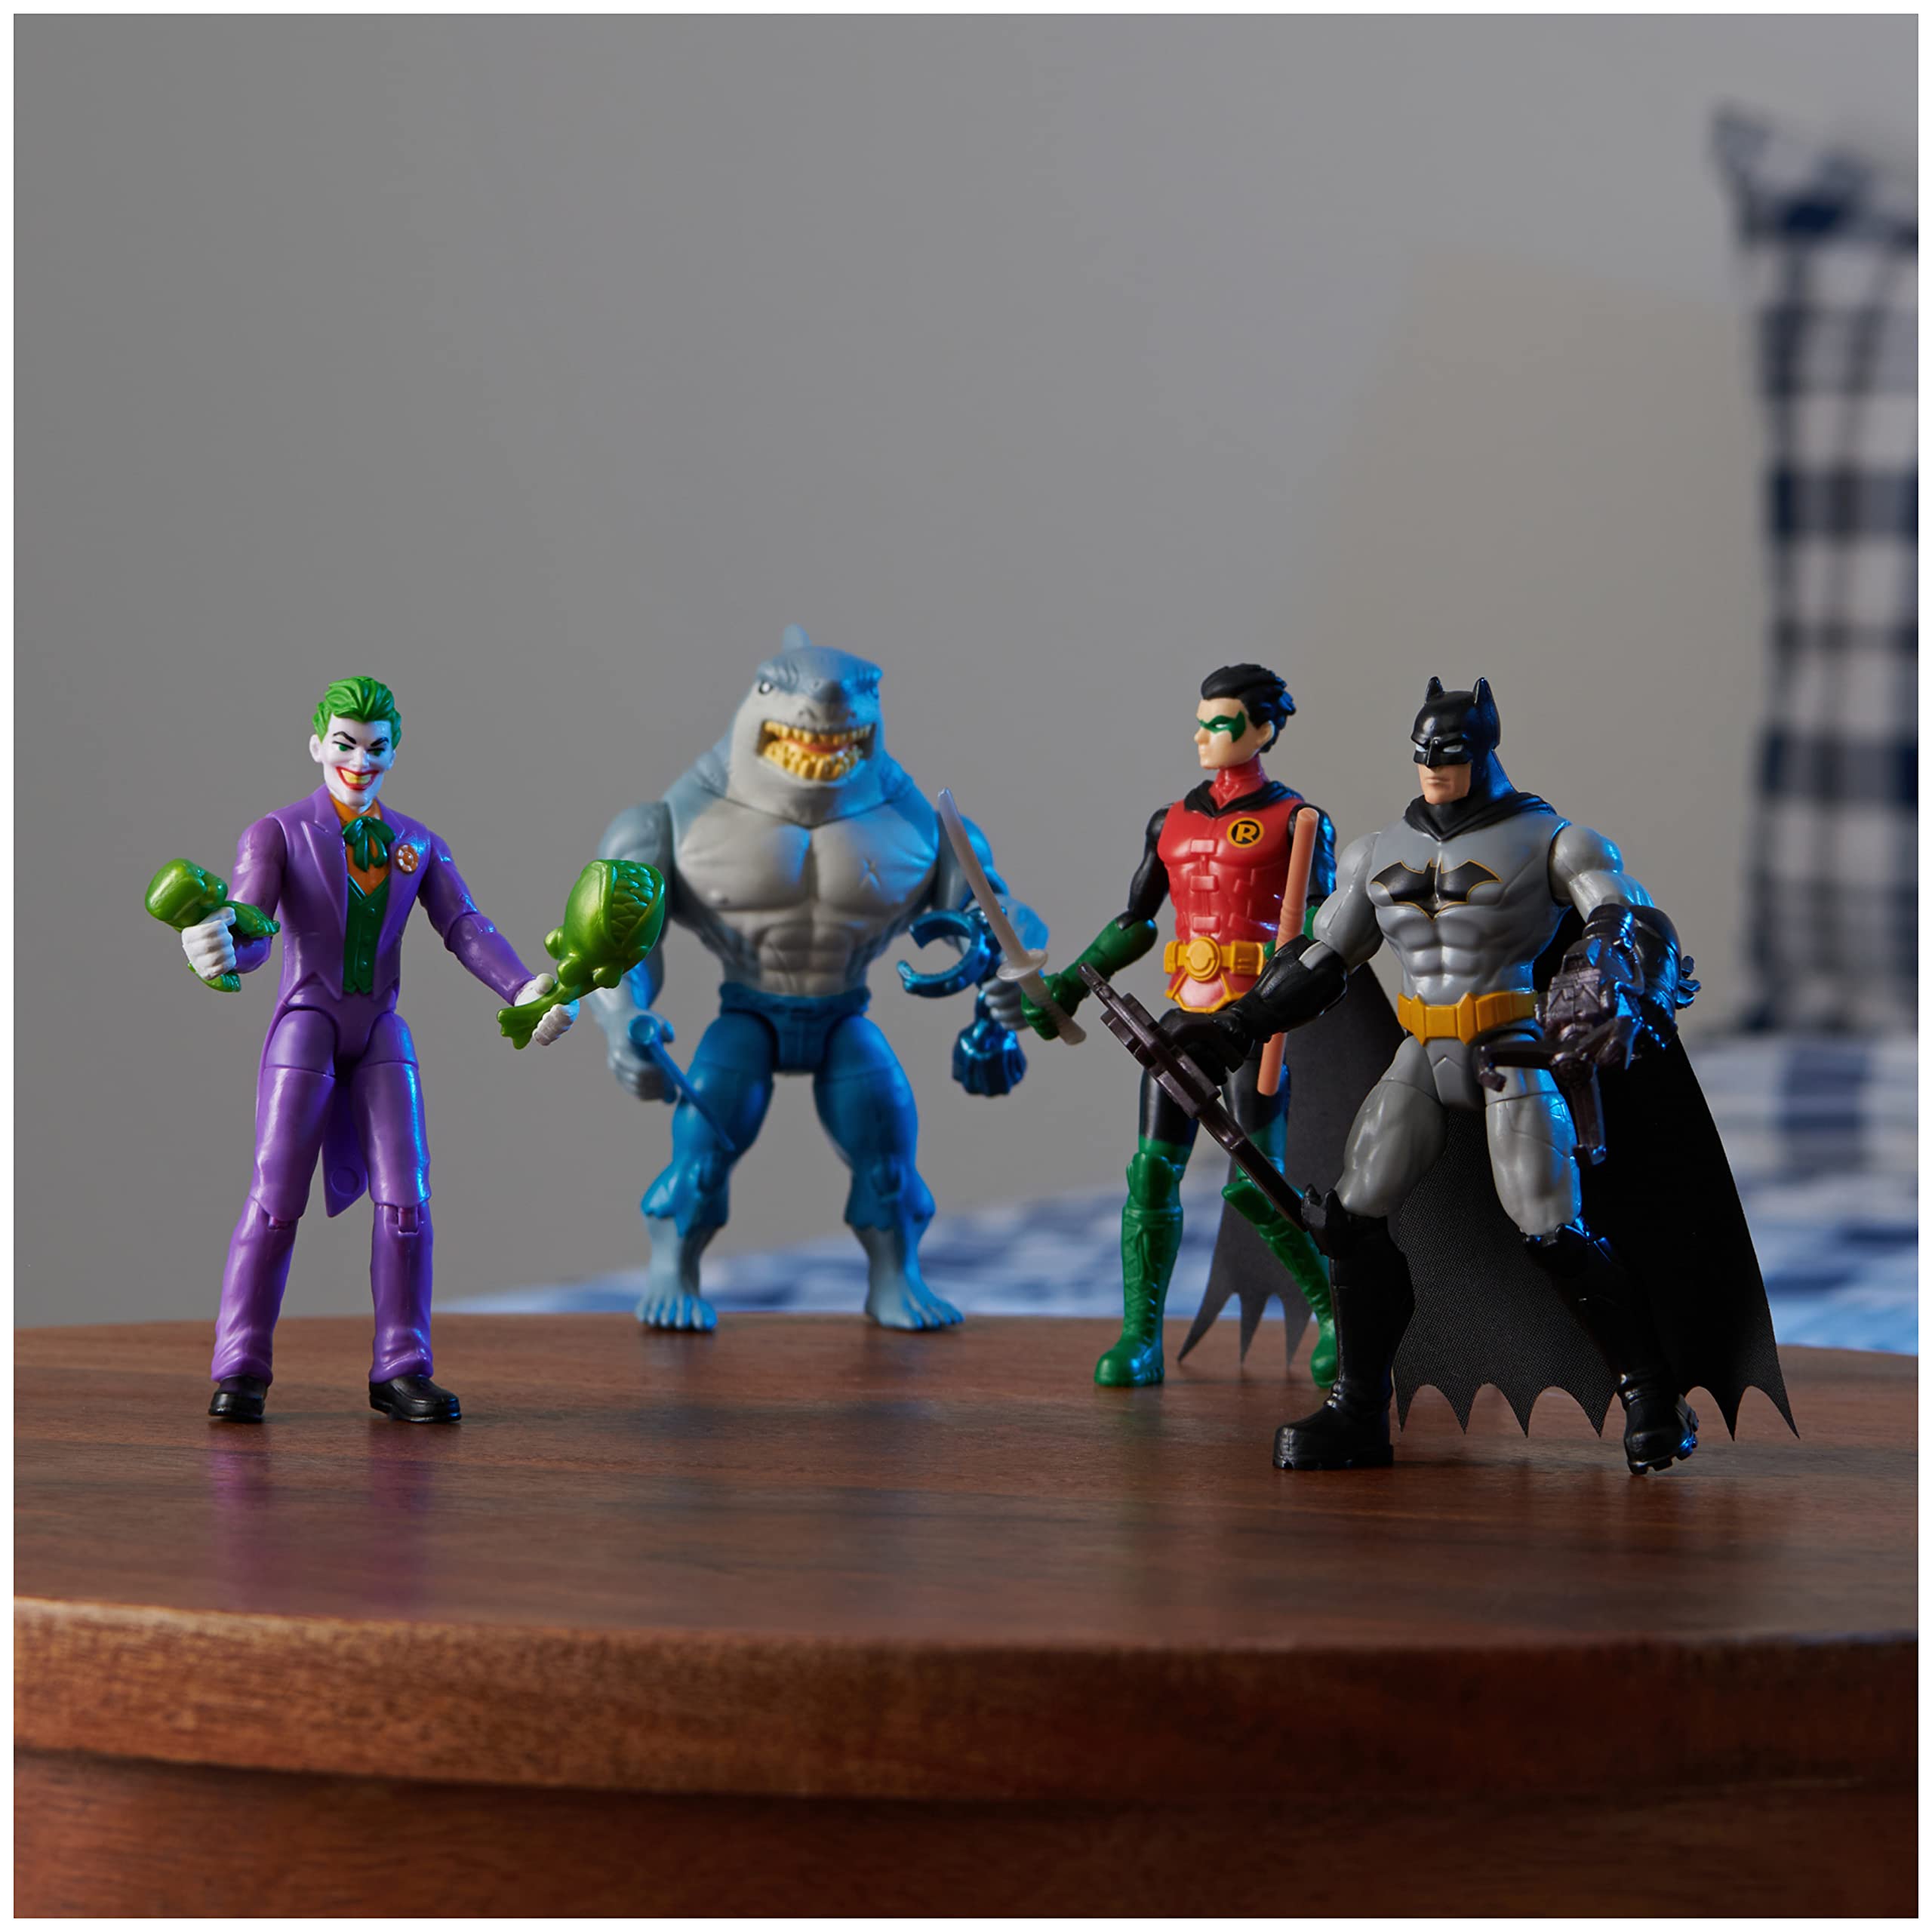 DC Comics, Batman and Robin vs. The Joker and King Shark, 4-inch Action Figures, Kids Toys for Boys and Girls Ages 3 and Up